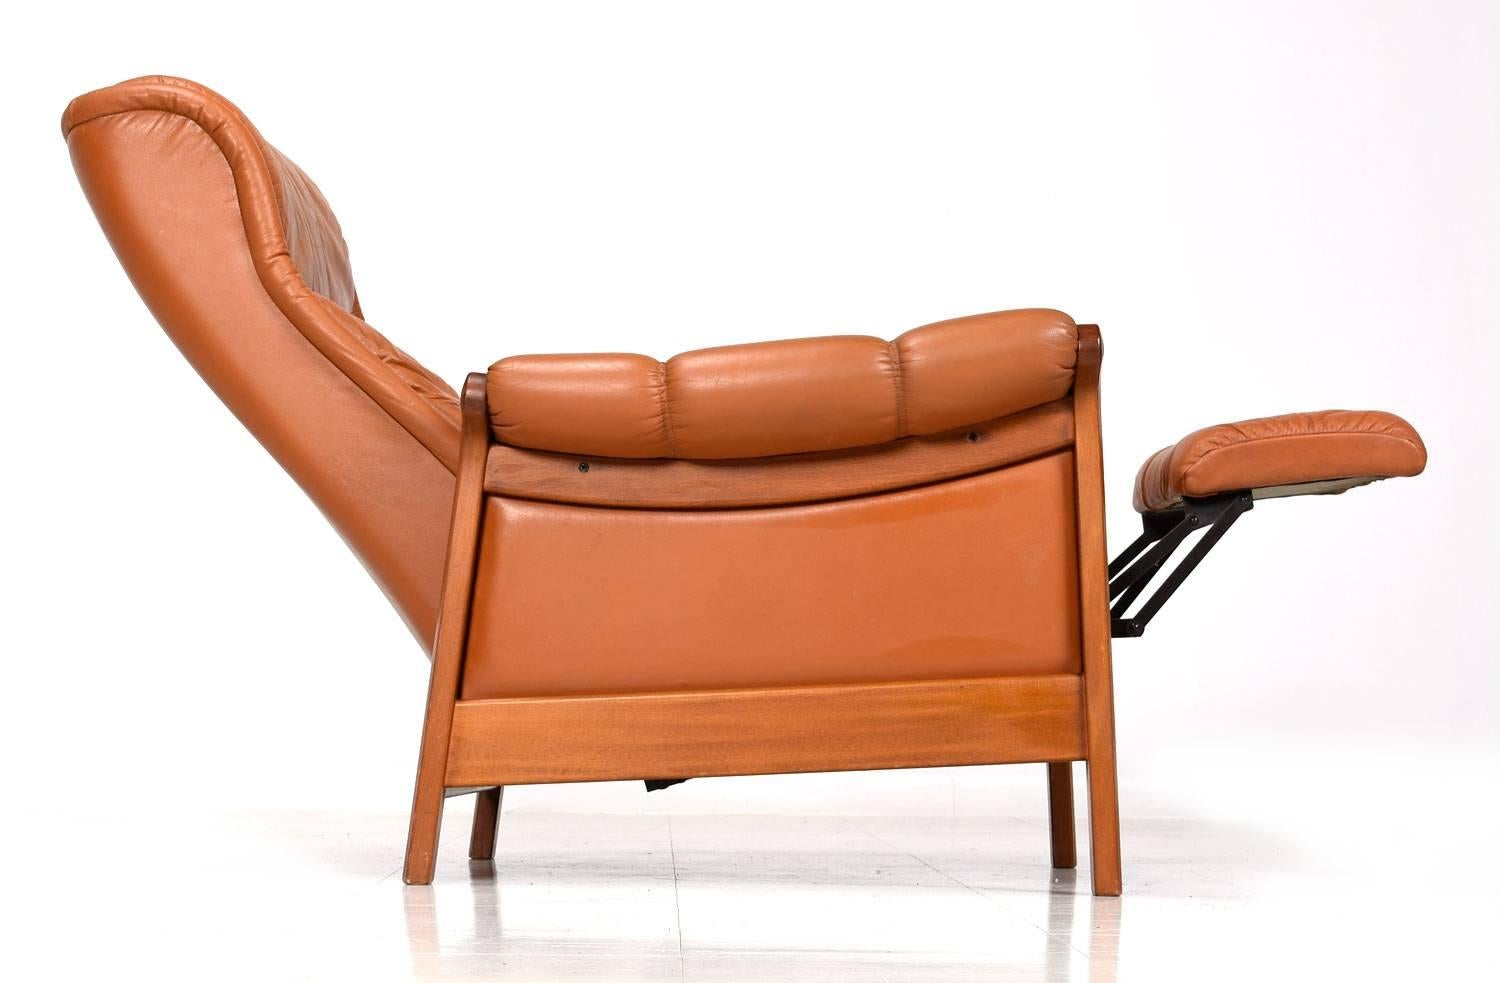 Vintage Danish modern teak recliner with original leather upholstery. Exceptionally comfortable with its well padded seat and arms. Lean back to push the chair into a reclining position and elevate the footrest to varying degrees. This is a time